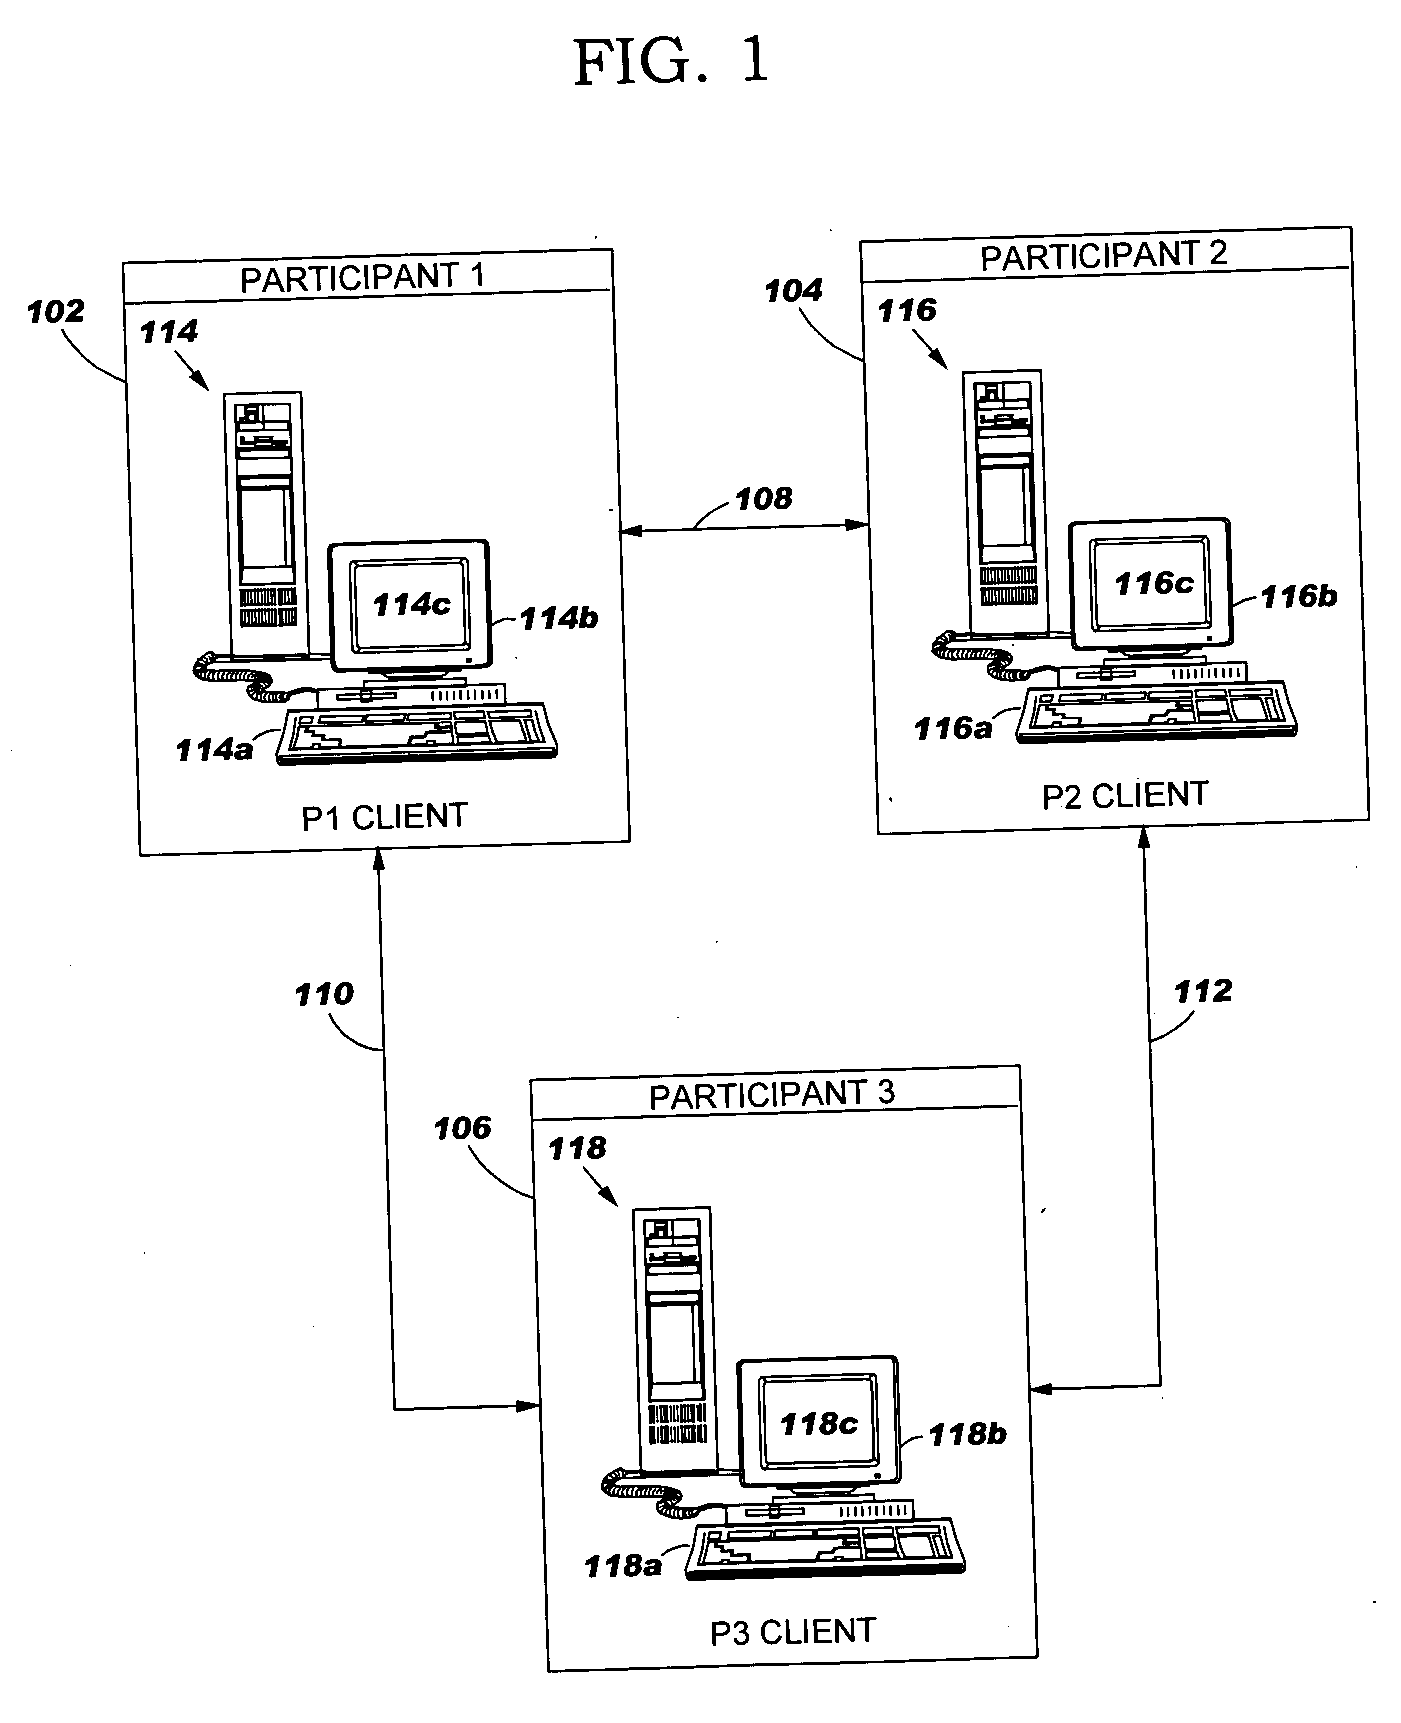 Apparatus and method for limiting access to instant messaging content on a display screen